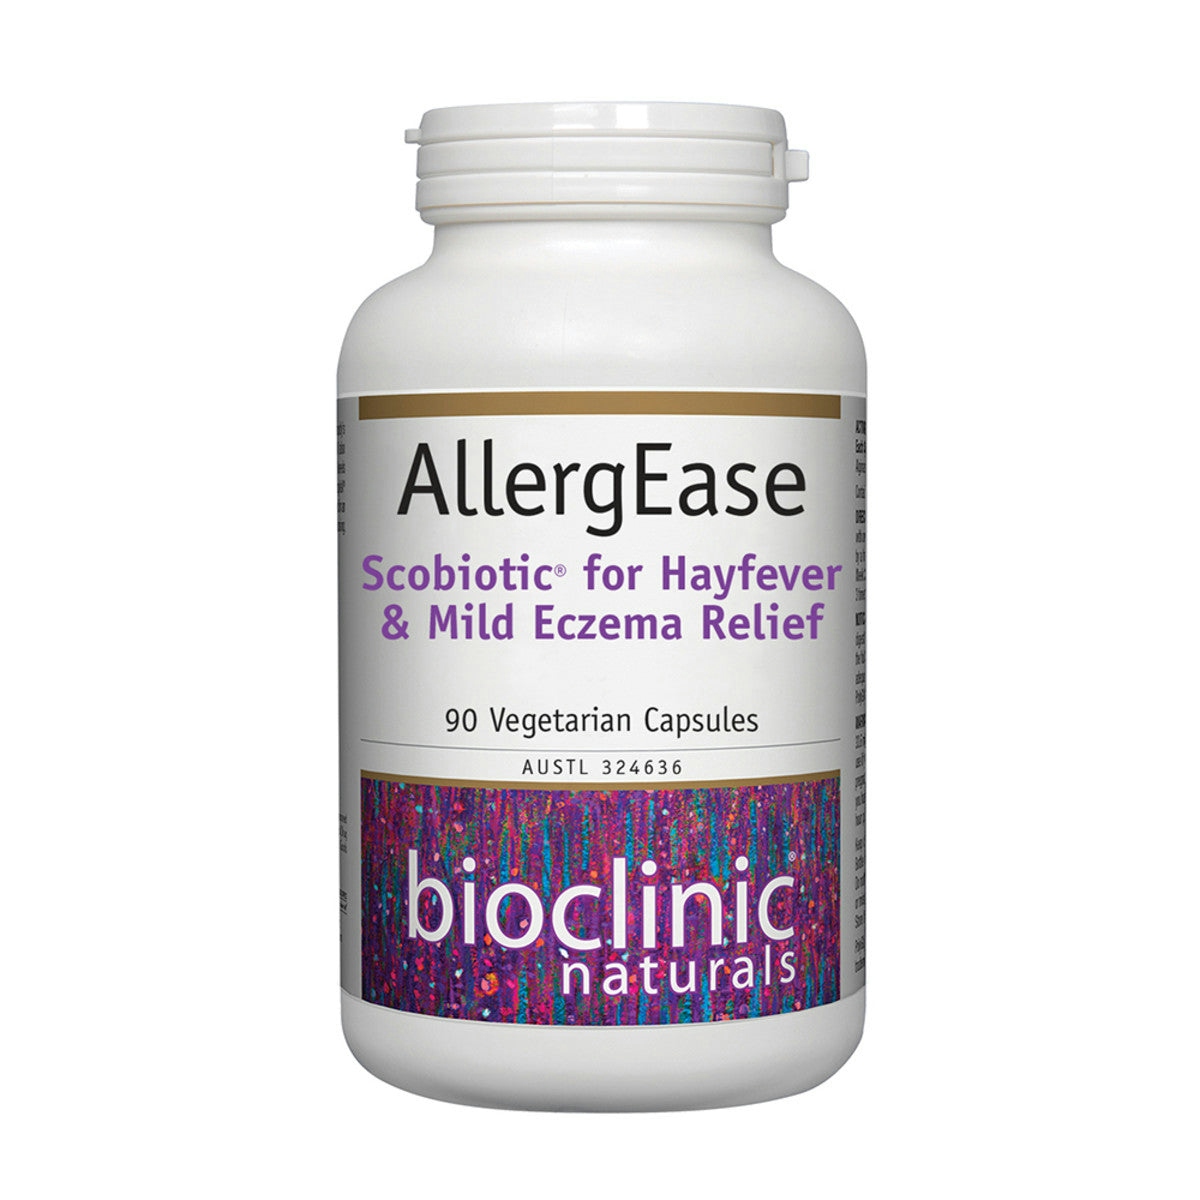 Image of Bioclinic Naturals AllergEase 90vc with a white background